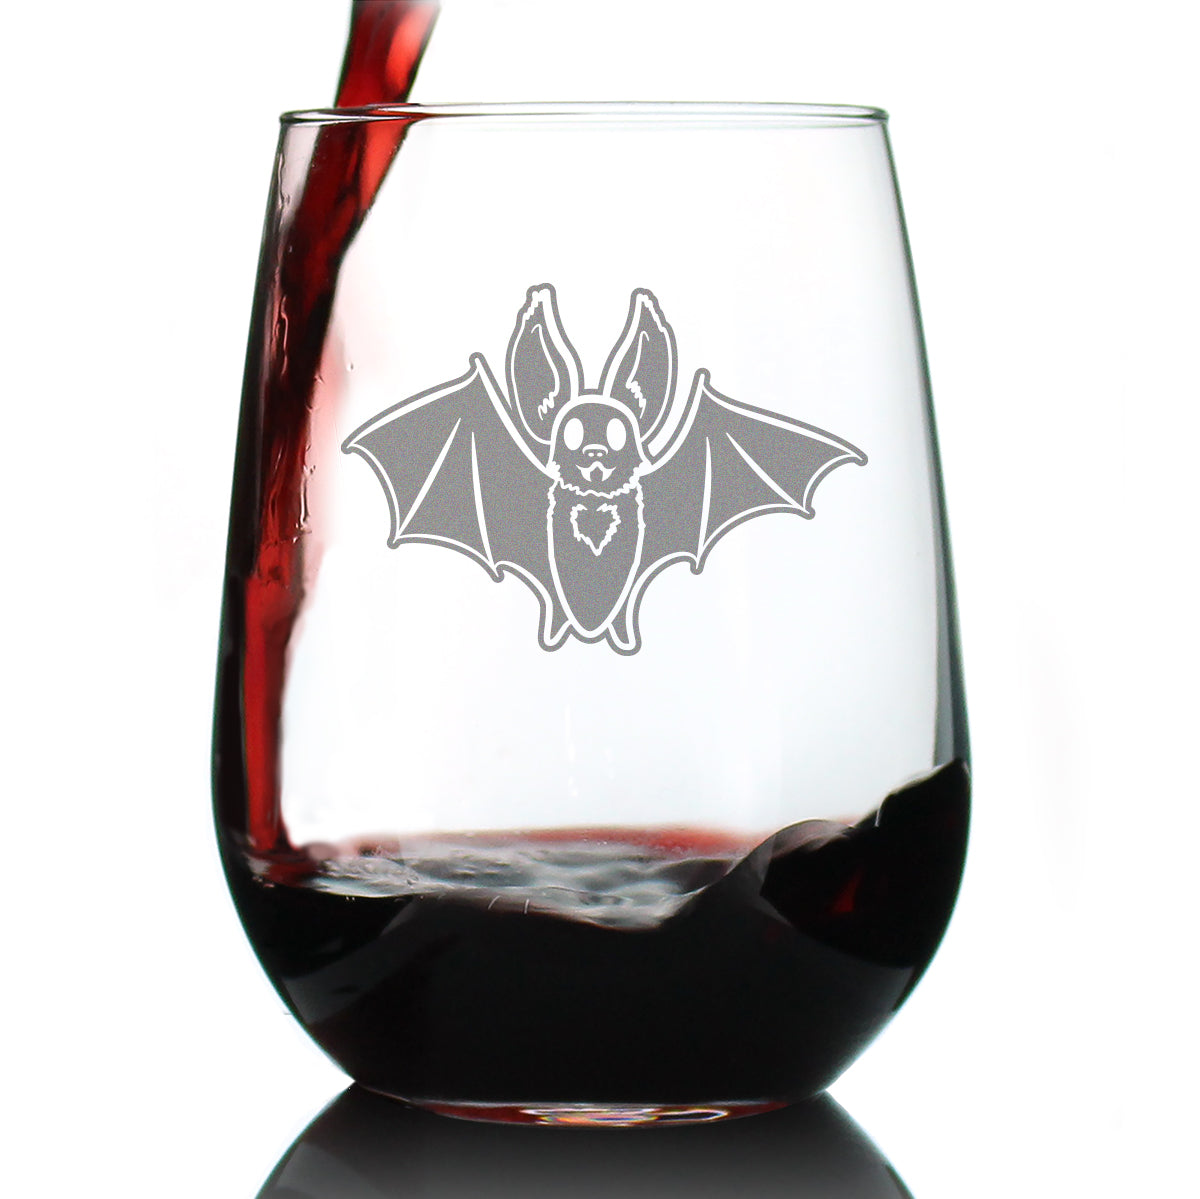 Bat Stemless Wine Glass - Funny Cute Bat Gifts - Spooky Fun Halloween Decor with Bats - Large 17 Oz Glasses